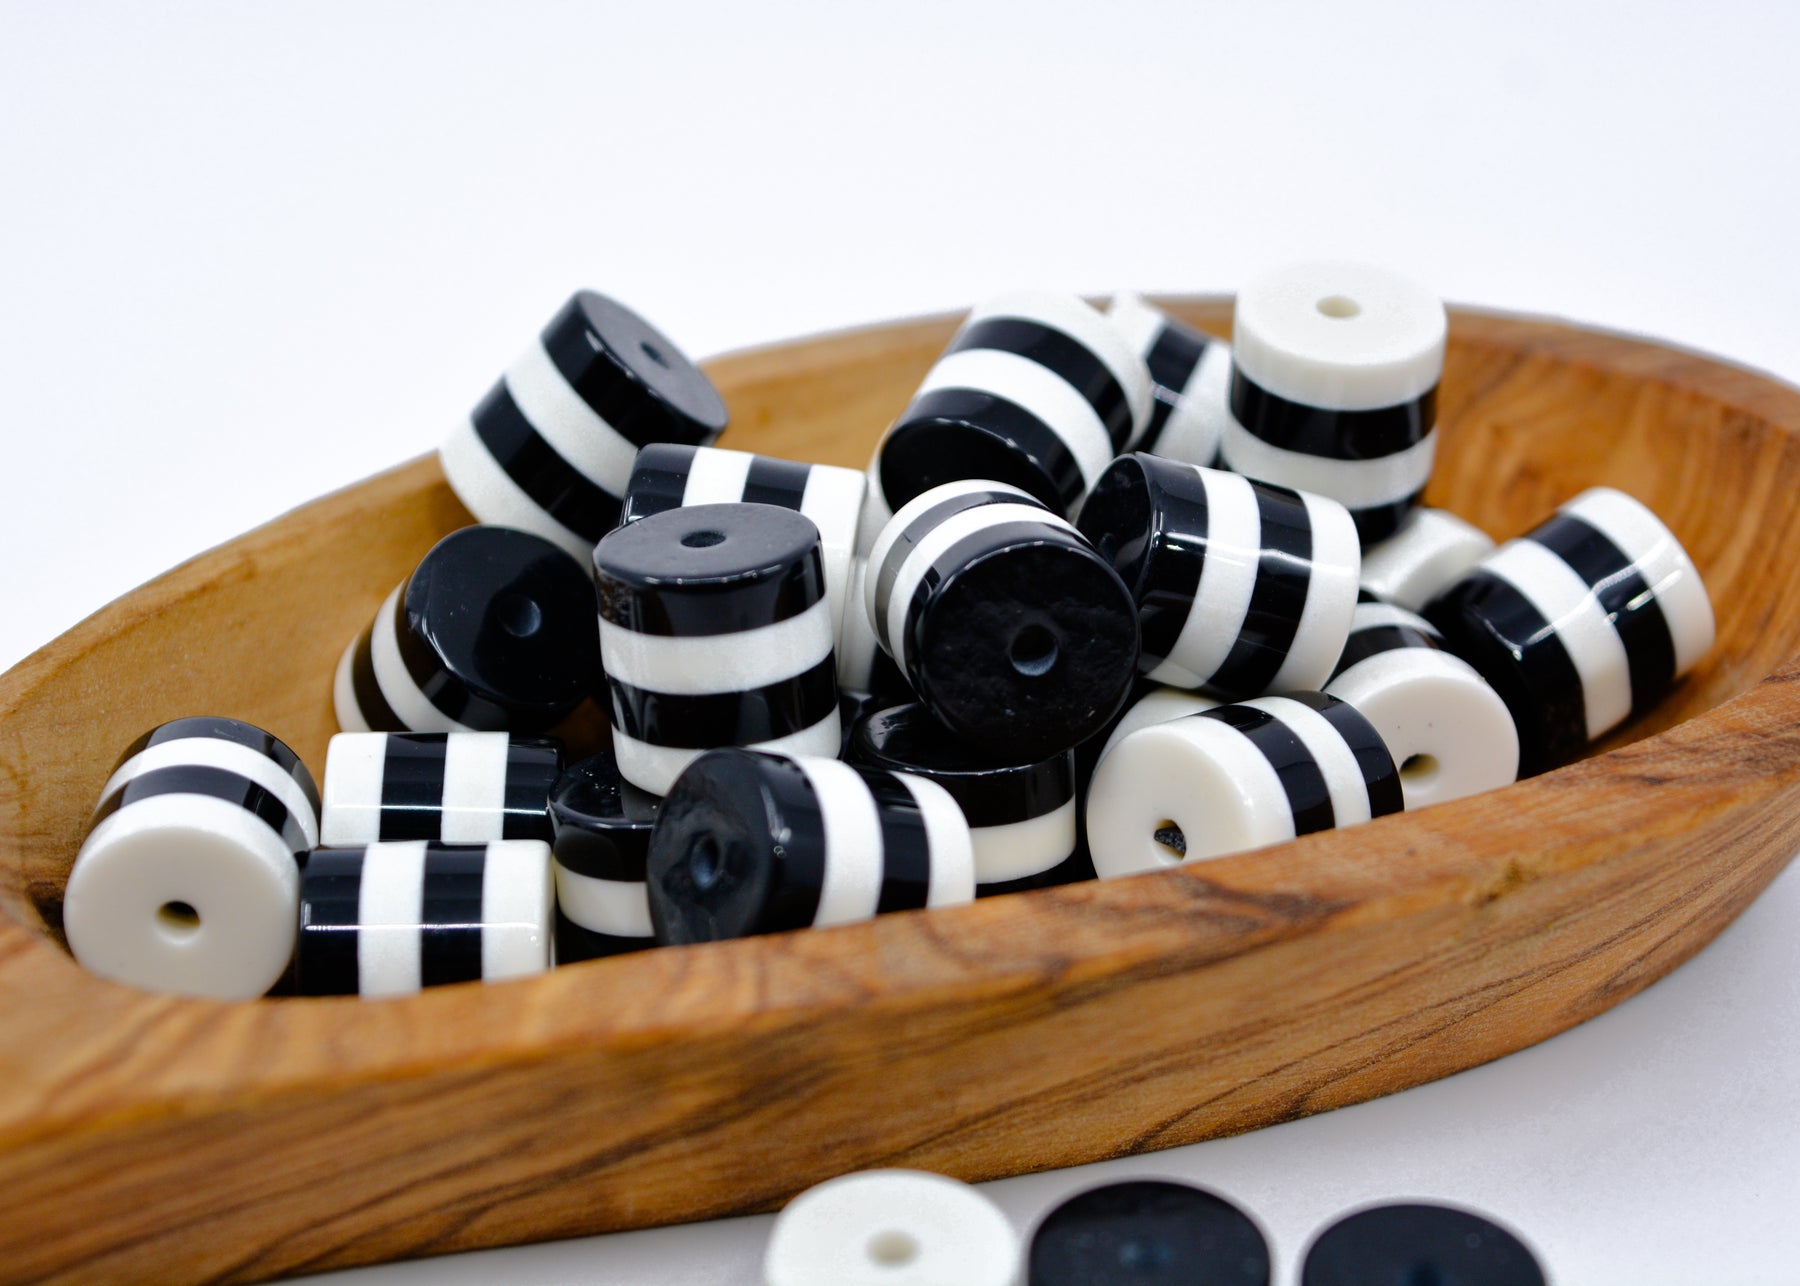 Color Block: 14x15mm Black and White Acrylic Tube Beads, 5 beads / Lucite  Beads